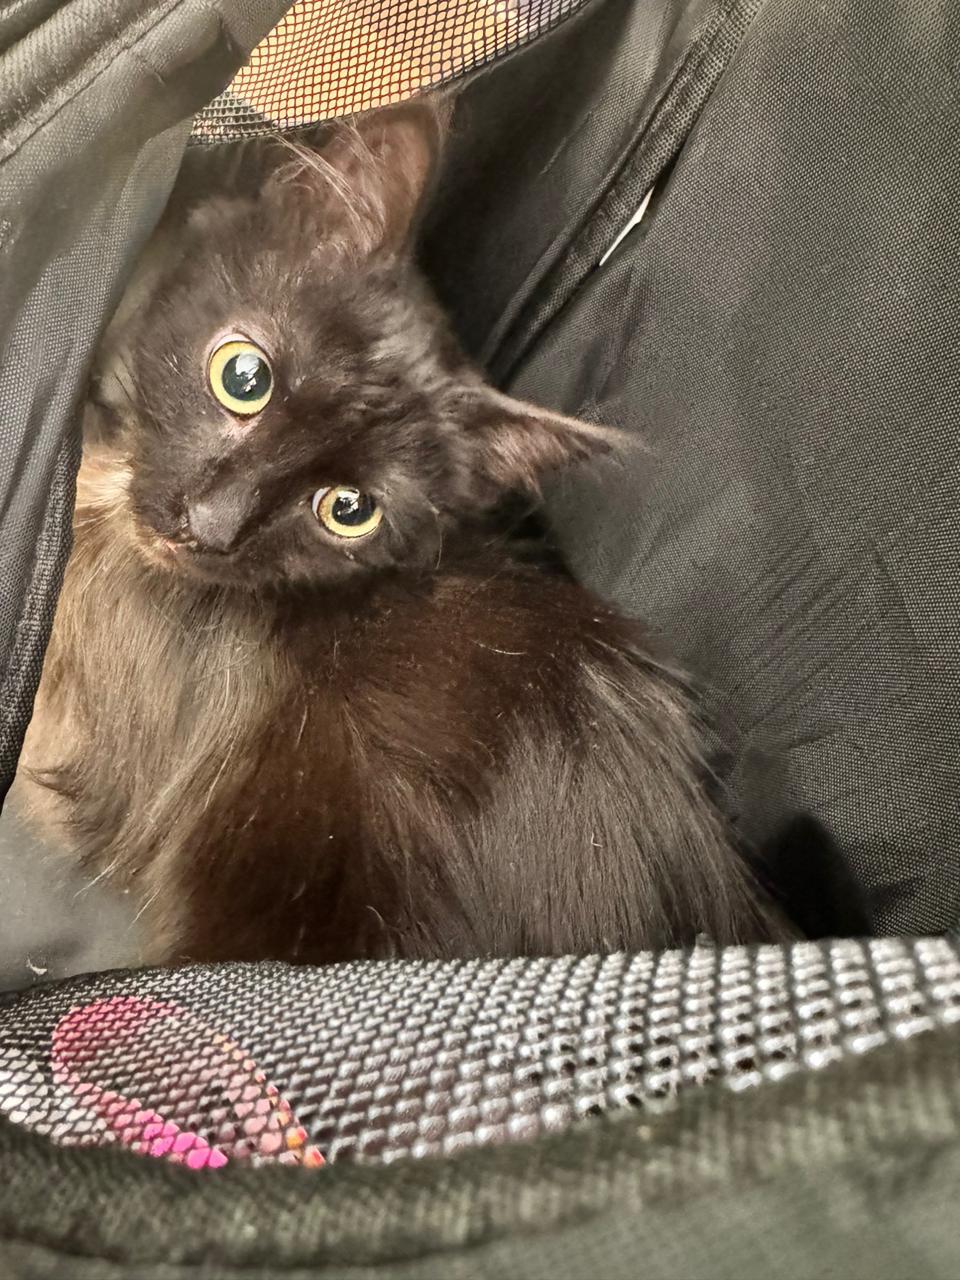 Continuation of the post “We help. We are urgently looking for a home or foster care for the kids. Help save the kittens before disaster happens. - cat, Homeless animals, Helping animals, In good hands, Kittens, Longpost, Overexposure